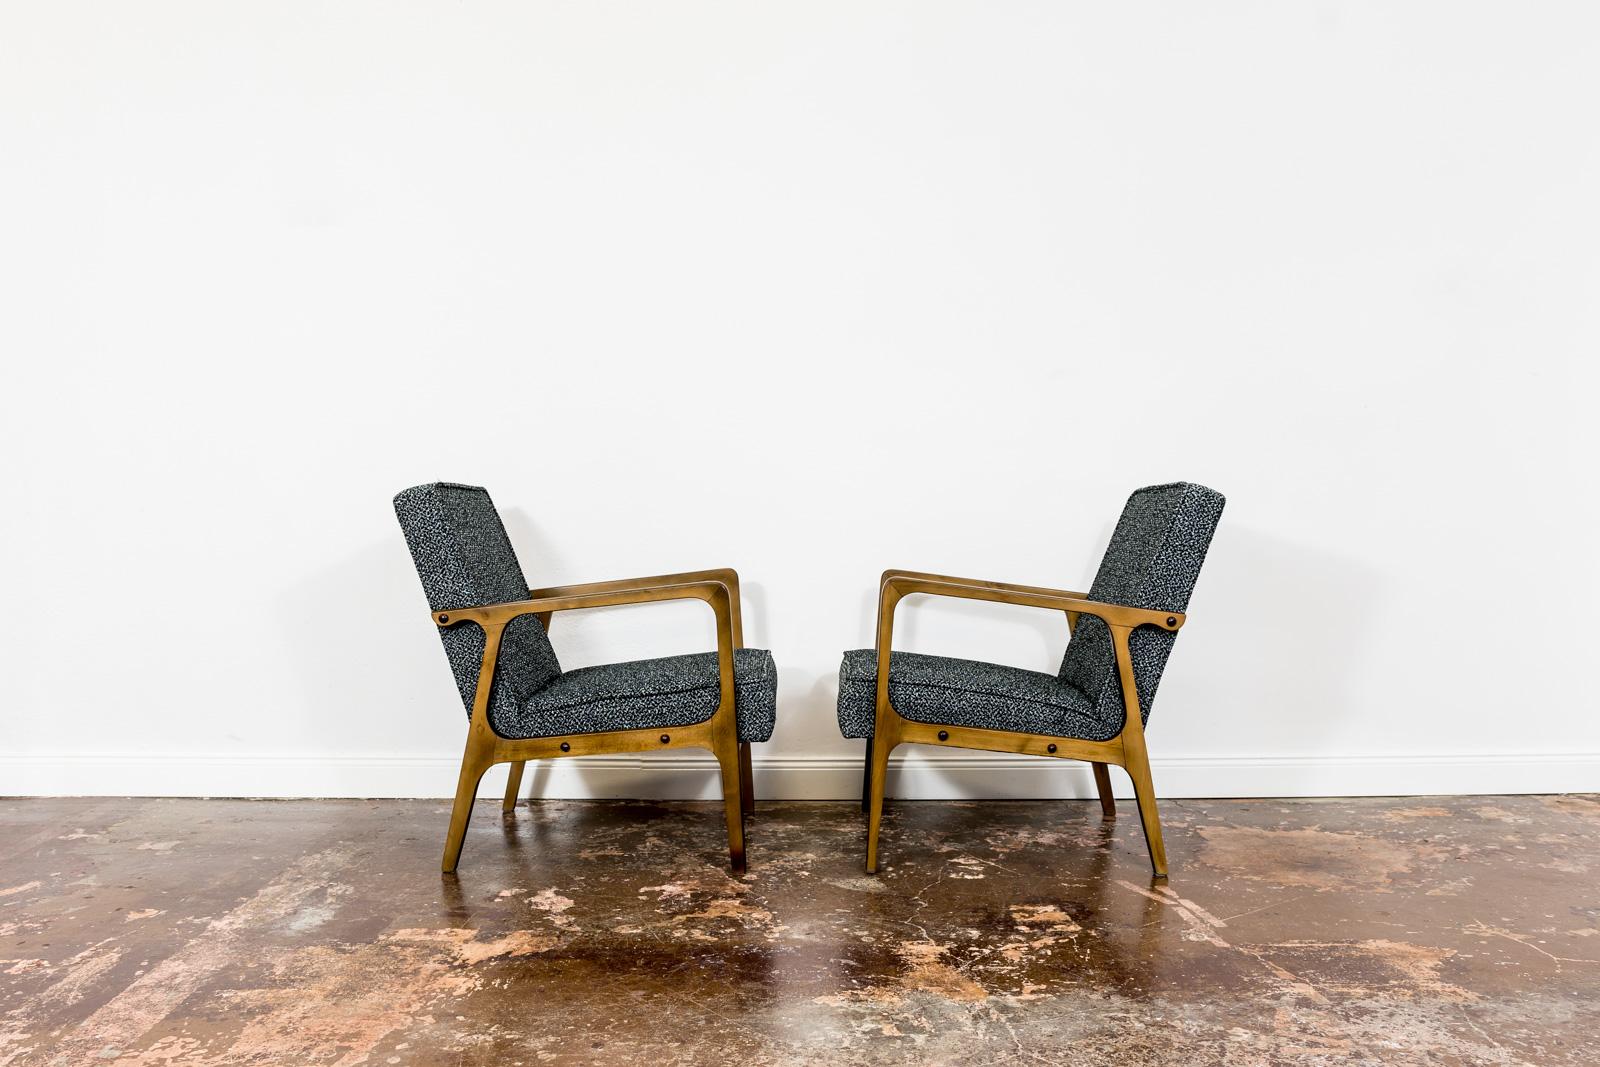 Pair Of Mid Century Armchairs Type 04-B From Bydgoskie Fabryki Mebli, 1960's In Good Condition For Sale In Wroclaw, PL